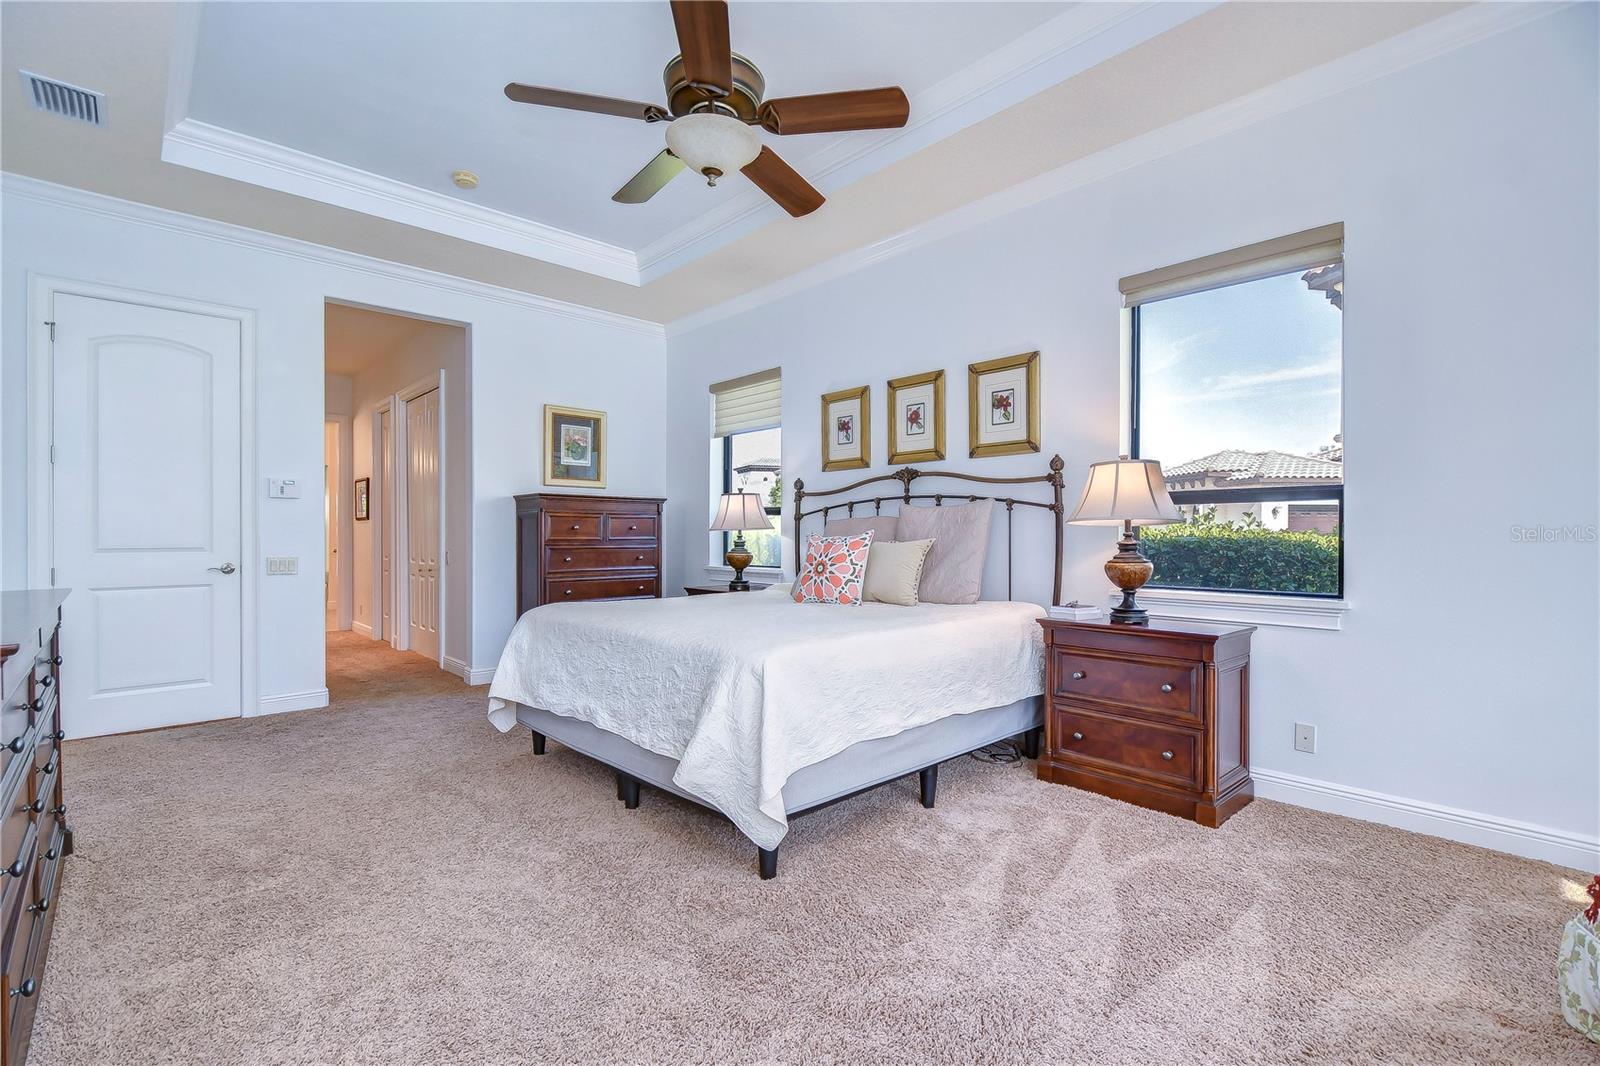 Situated in a private wing of the home features private access to the lanai, his and her walk-in closets!